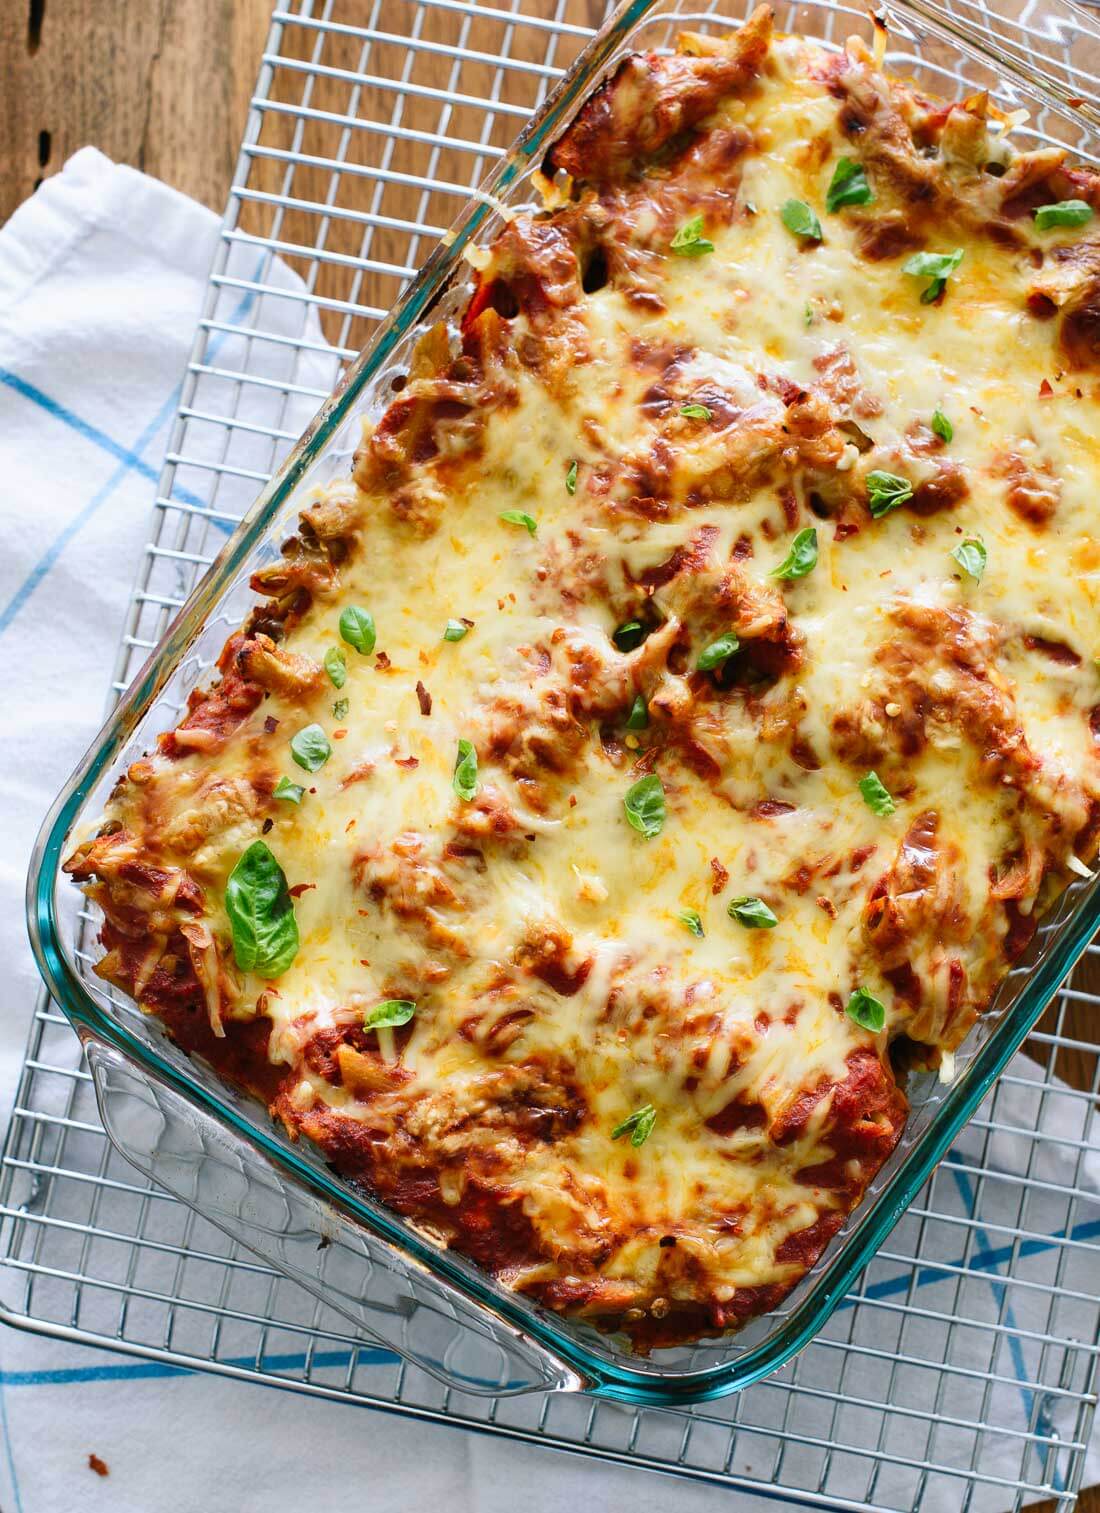 This vegetarian baked ziti recipe is absolutely delicious. Everyone will love this easy weeknight dinner option. cookieandkate.com